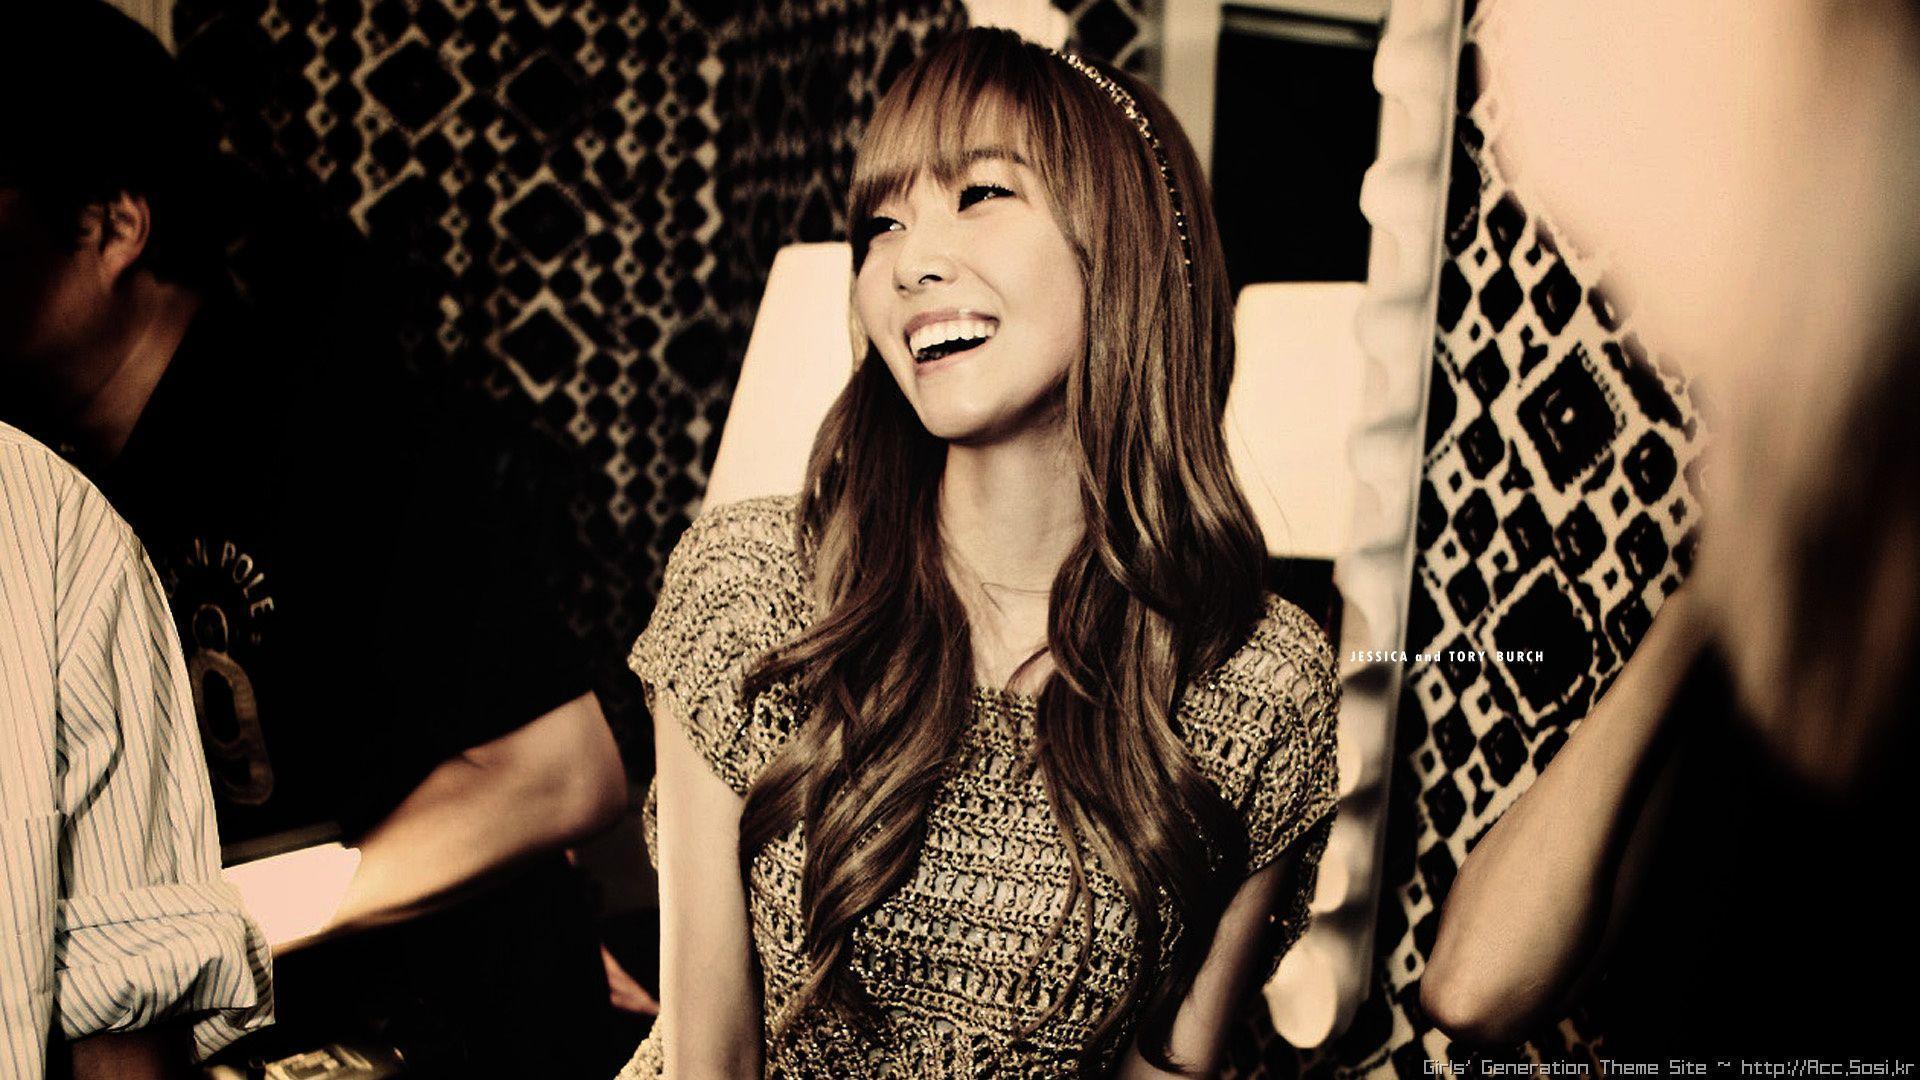 Snsd Jessica Wallpapers Wallpaper Cave